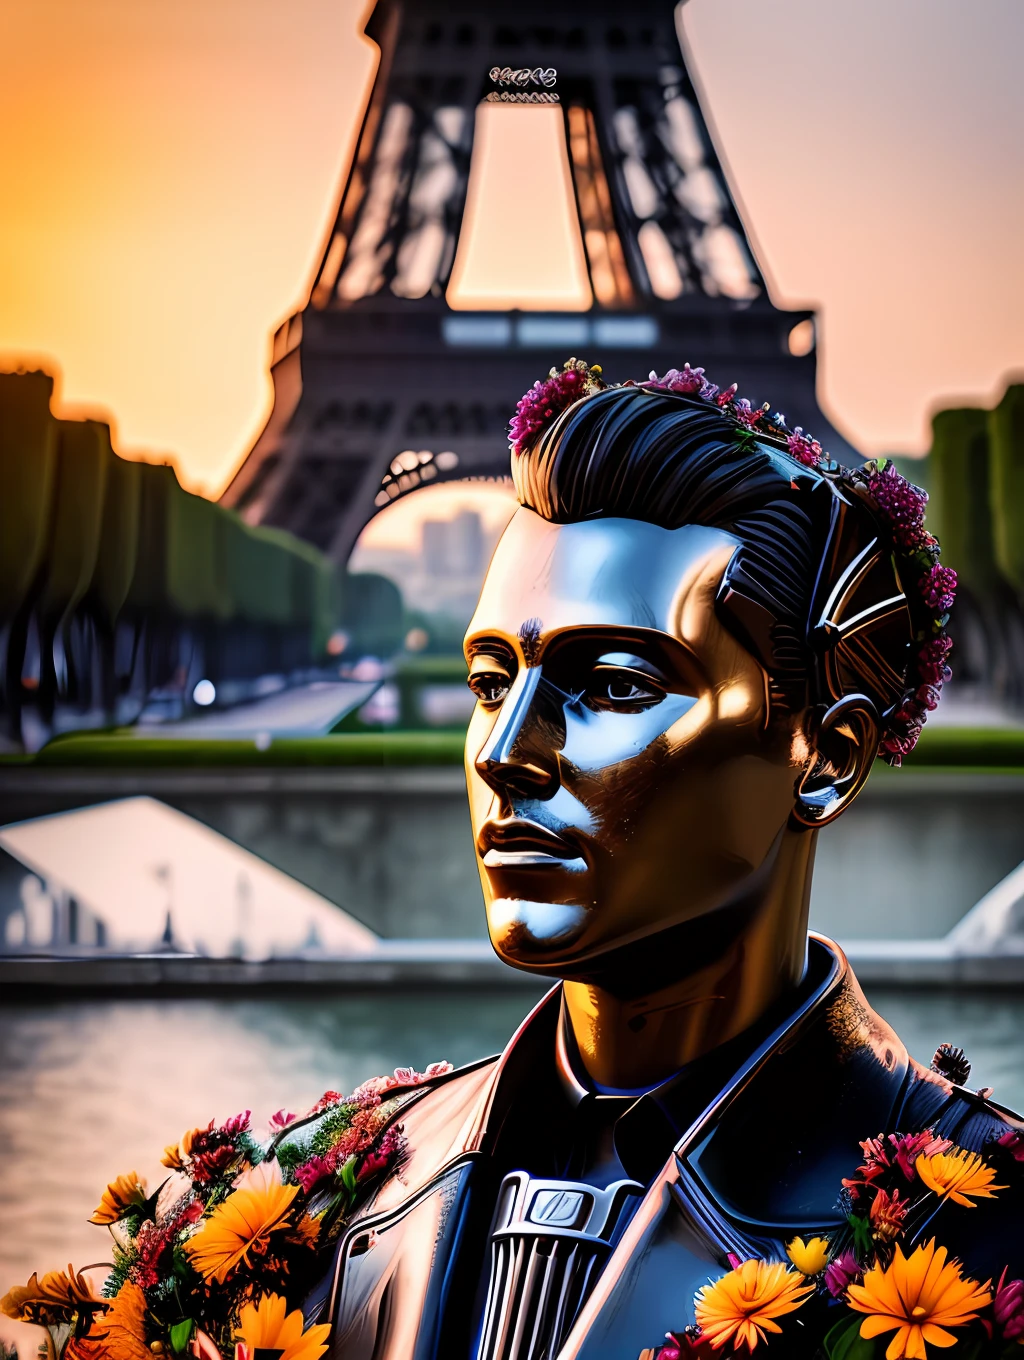 An insanely detailed photo實際的 digital art piece portrait of a retro robot holding a bouquet of flowers in front of the Eiffel Tower, 攝影, 實際的, 電影燈光, 日落, 浪漫的, 憂鬱的, 看著相機, ultra實際的.